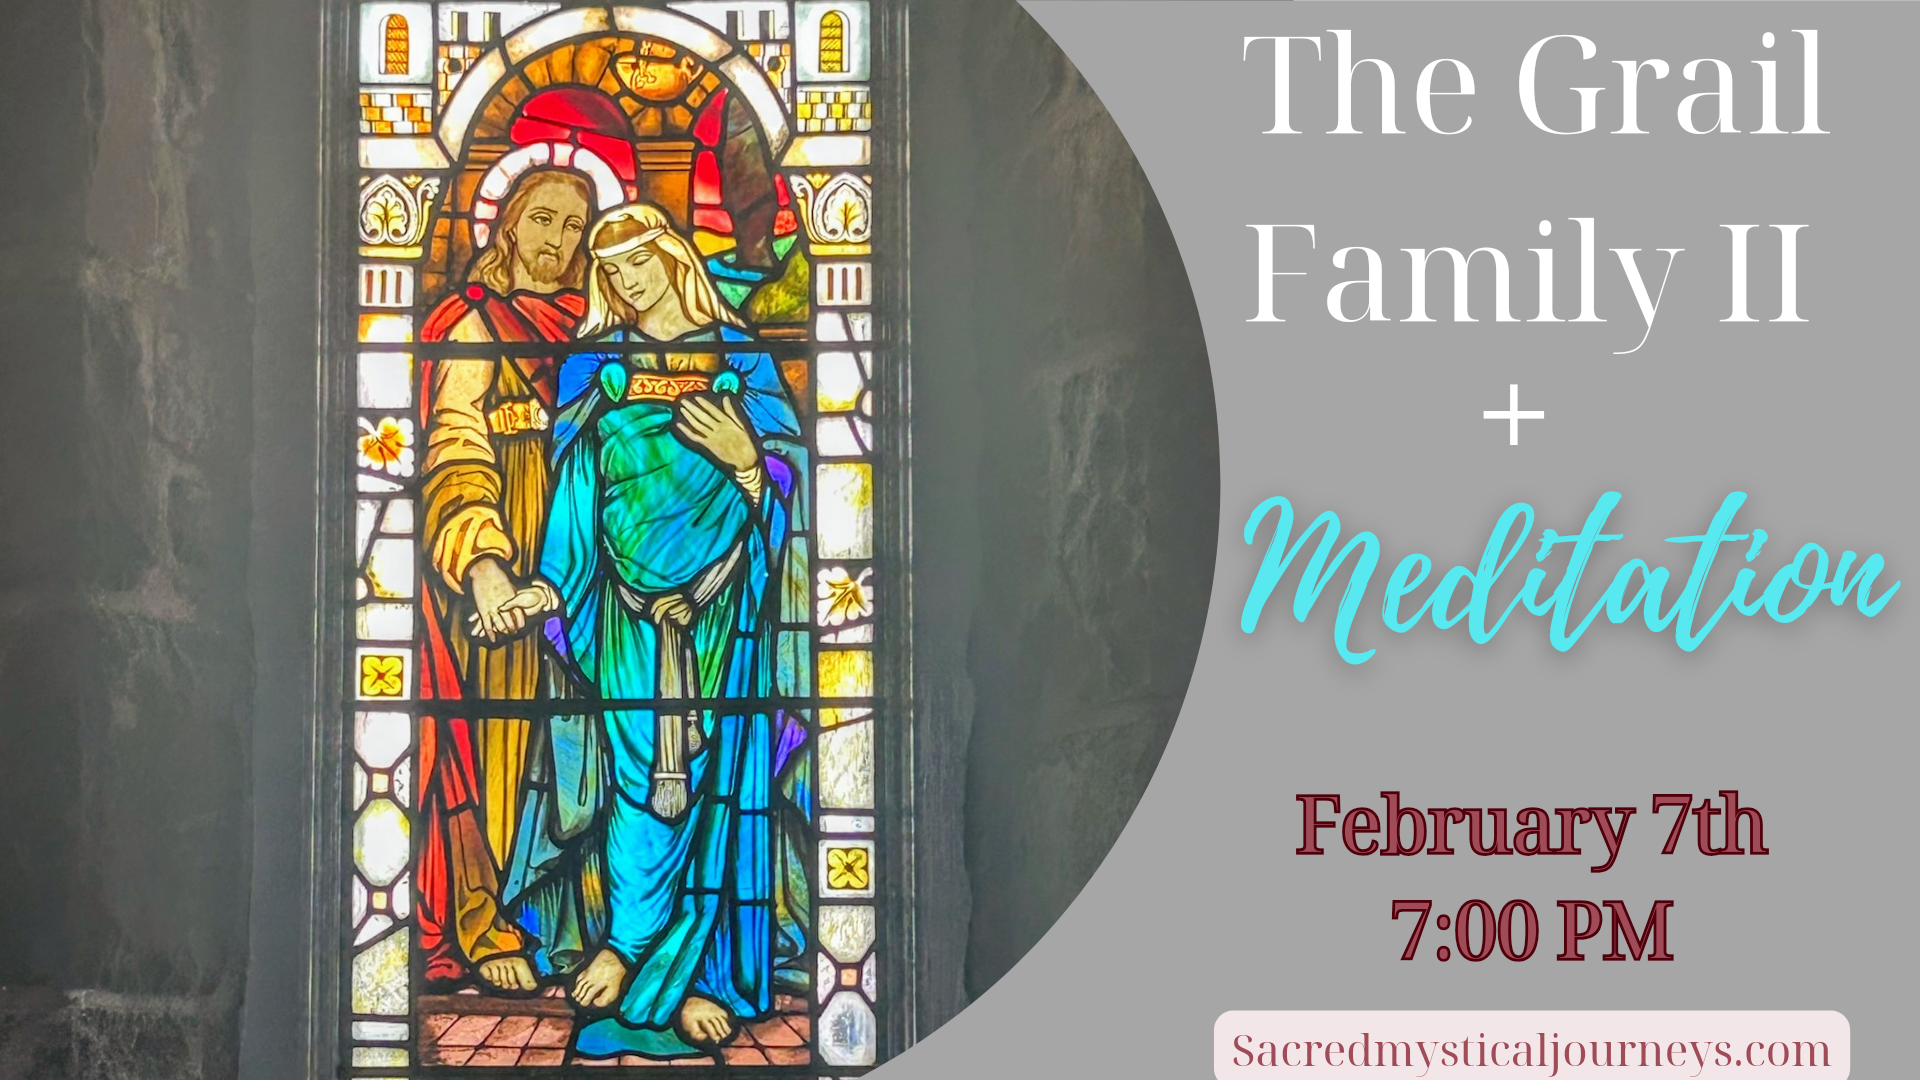 The Grail Family II + Meditation  ﻿Golden Flame of Illumination  February 7th - 7:00pm MST